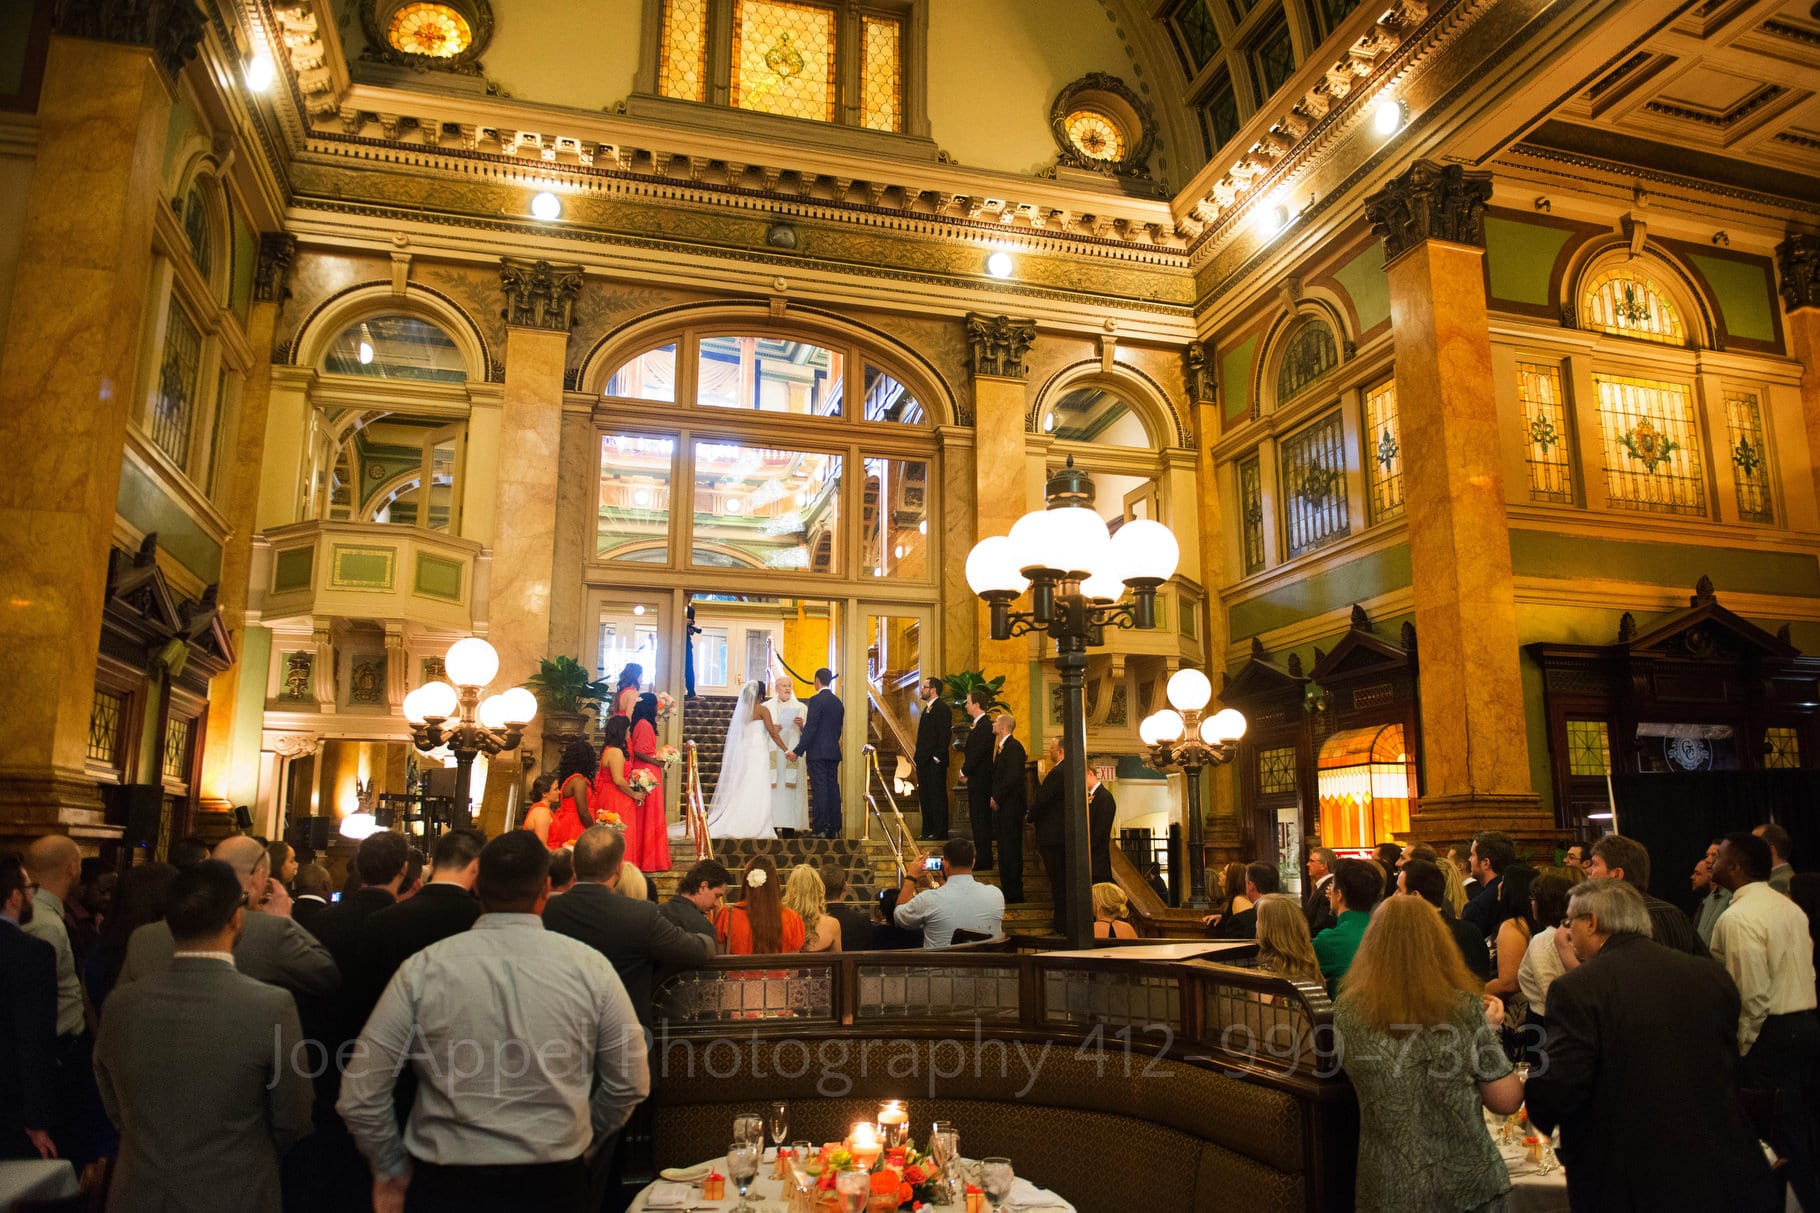 Guests stand on the ground floor of a large, golden-hued, ornate room as the bride and groom are married on the stairway above them. A classic scene during a Grand Concourse Wedding.